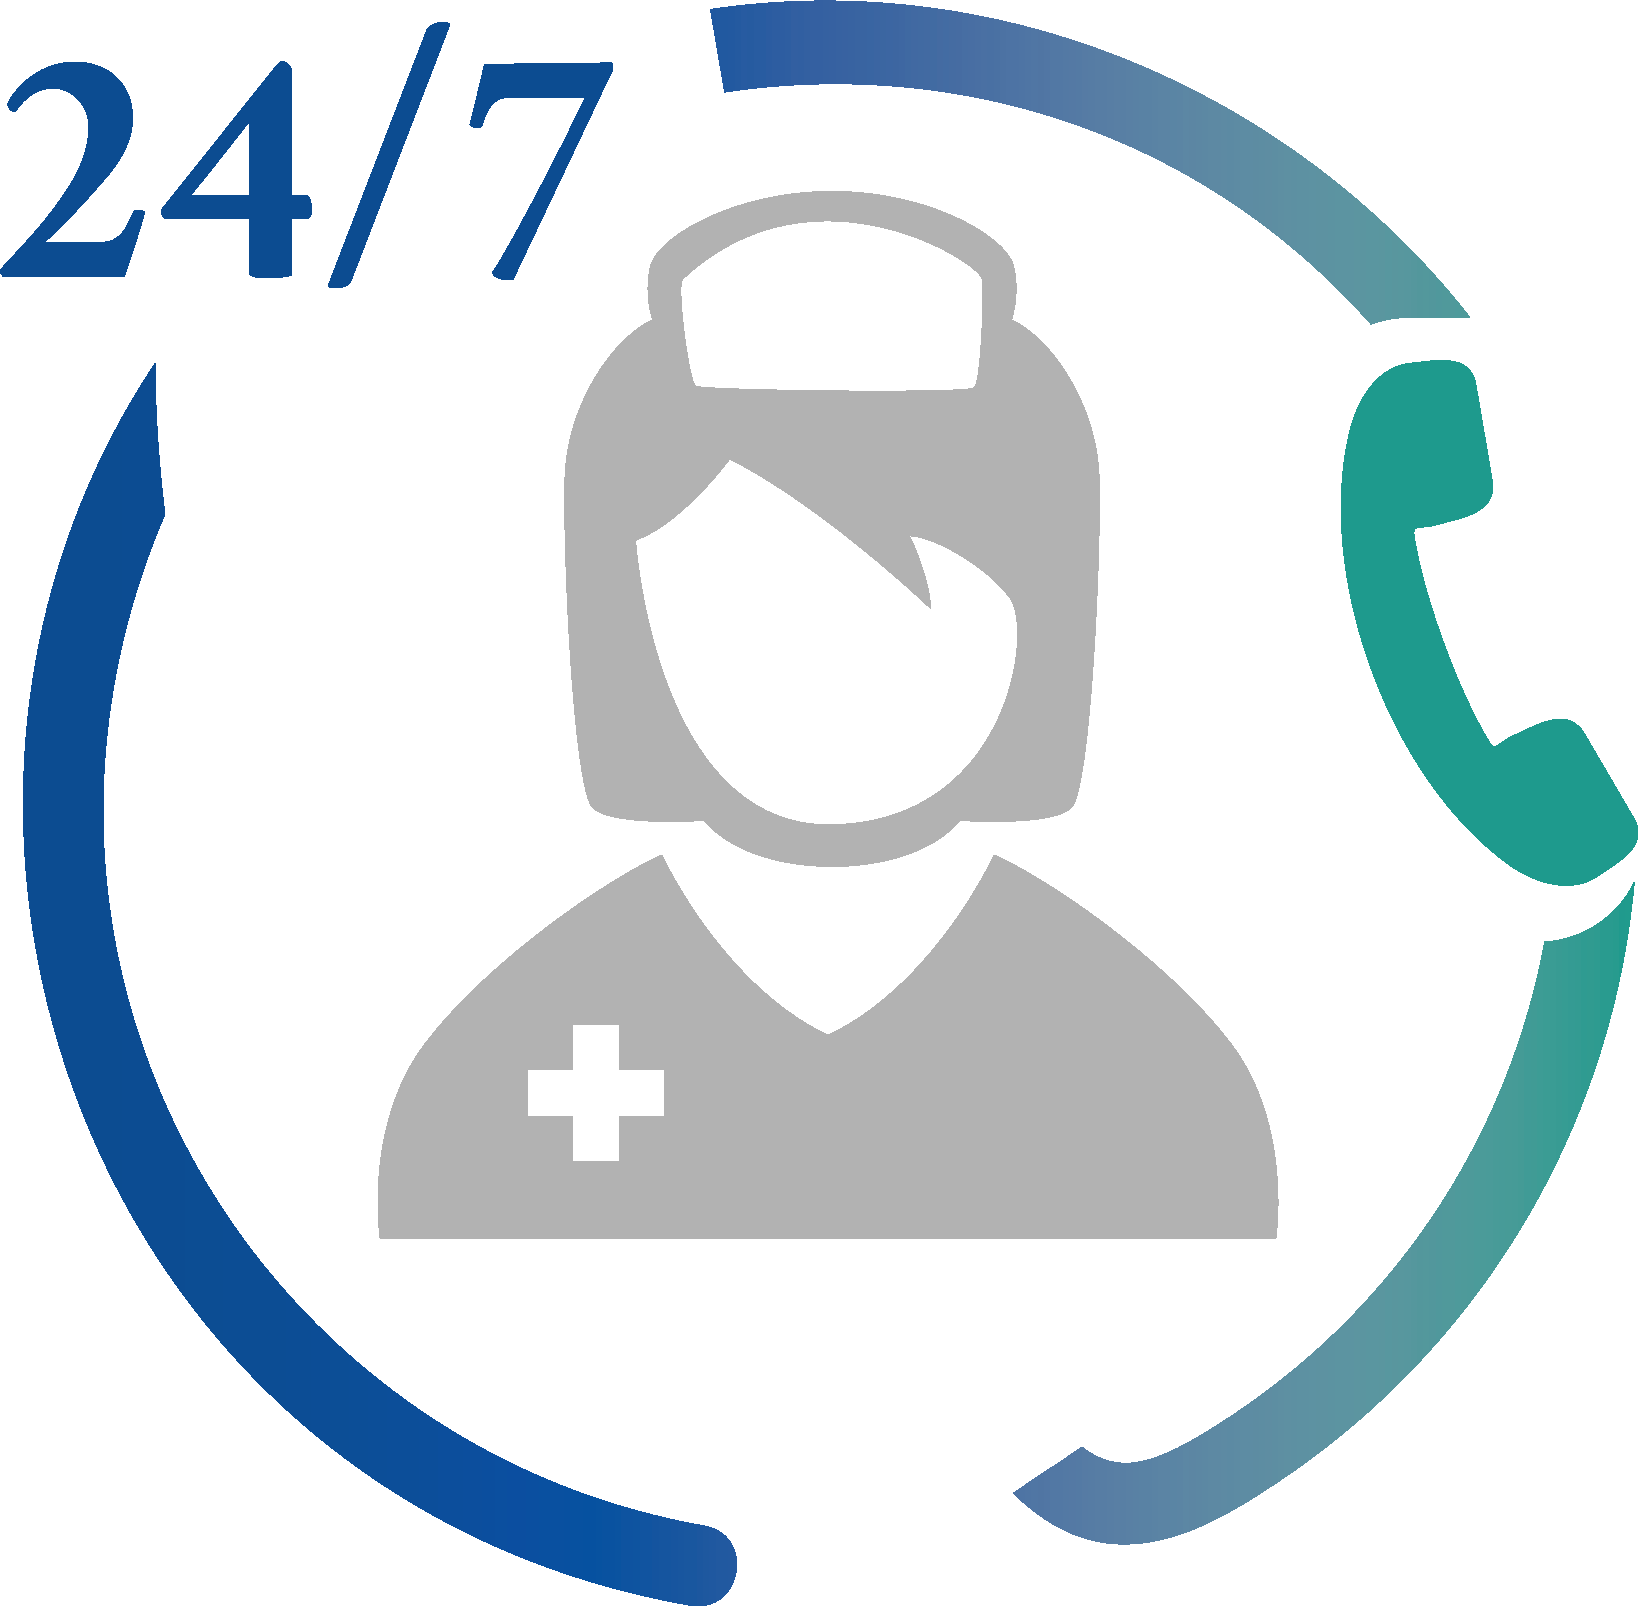 24/7 Telephonic Nurse Triagethis is the first nurse you should call after an injury at work